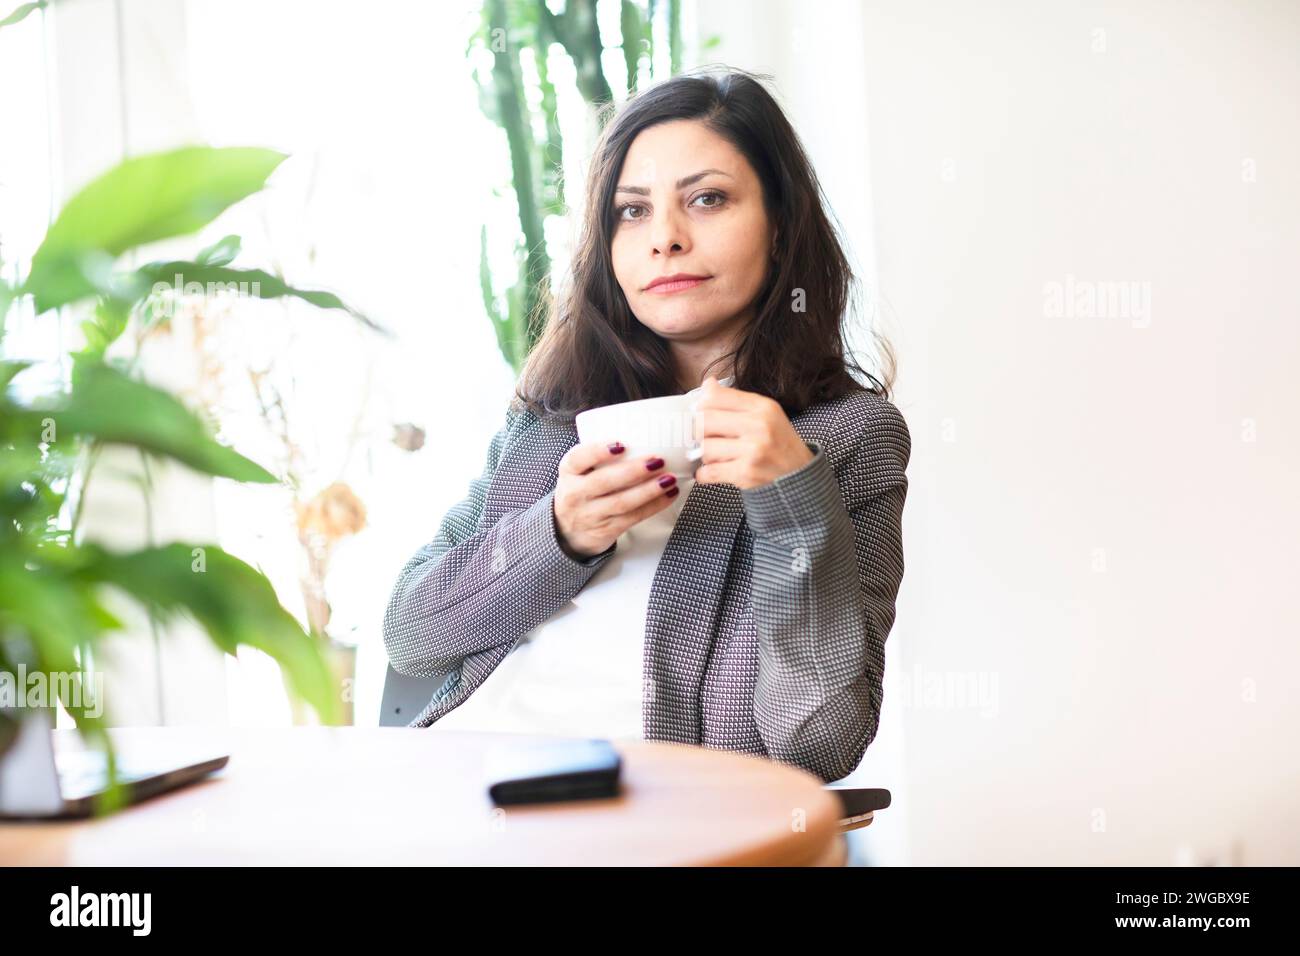 Businesswoman sitting in an office drinking a cup of coffee Stock Photo